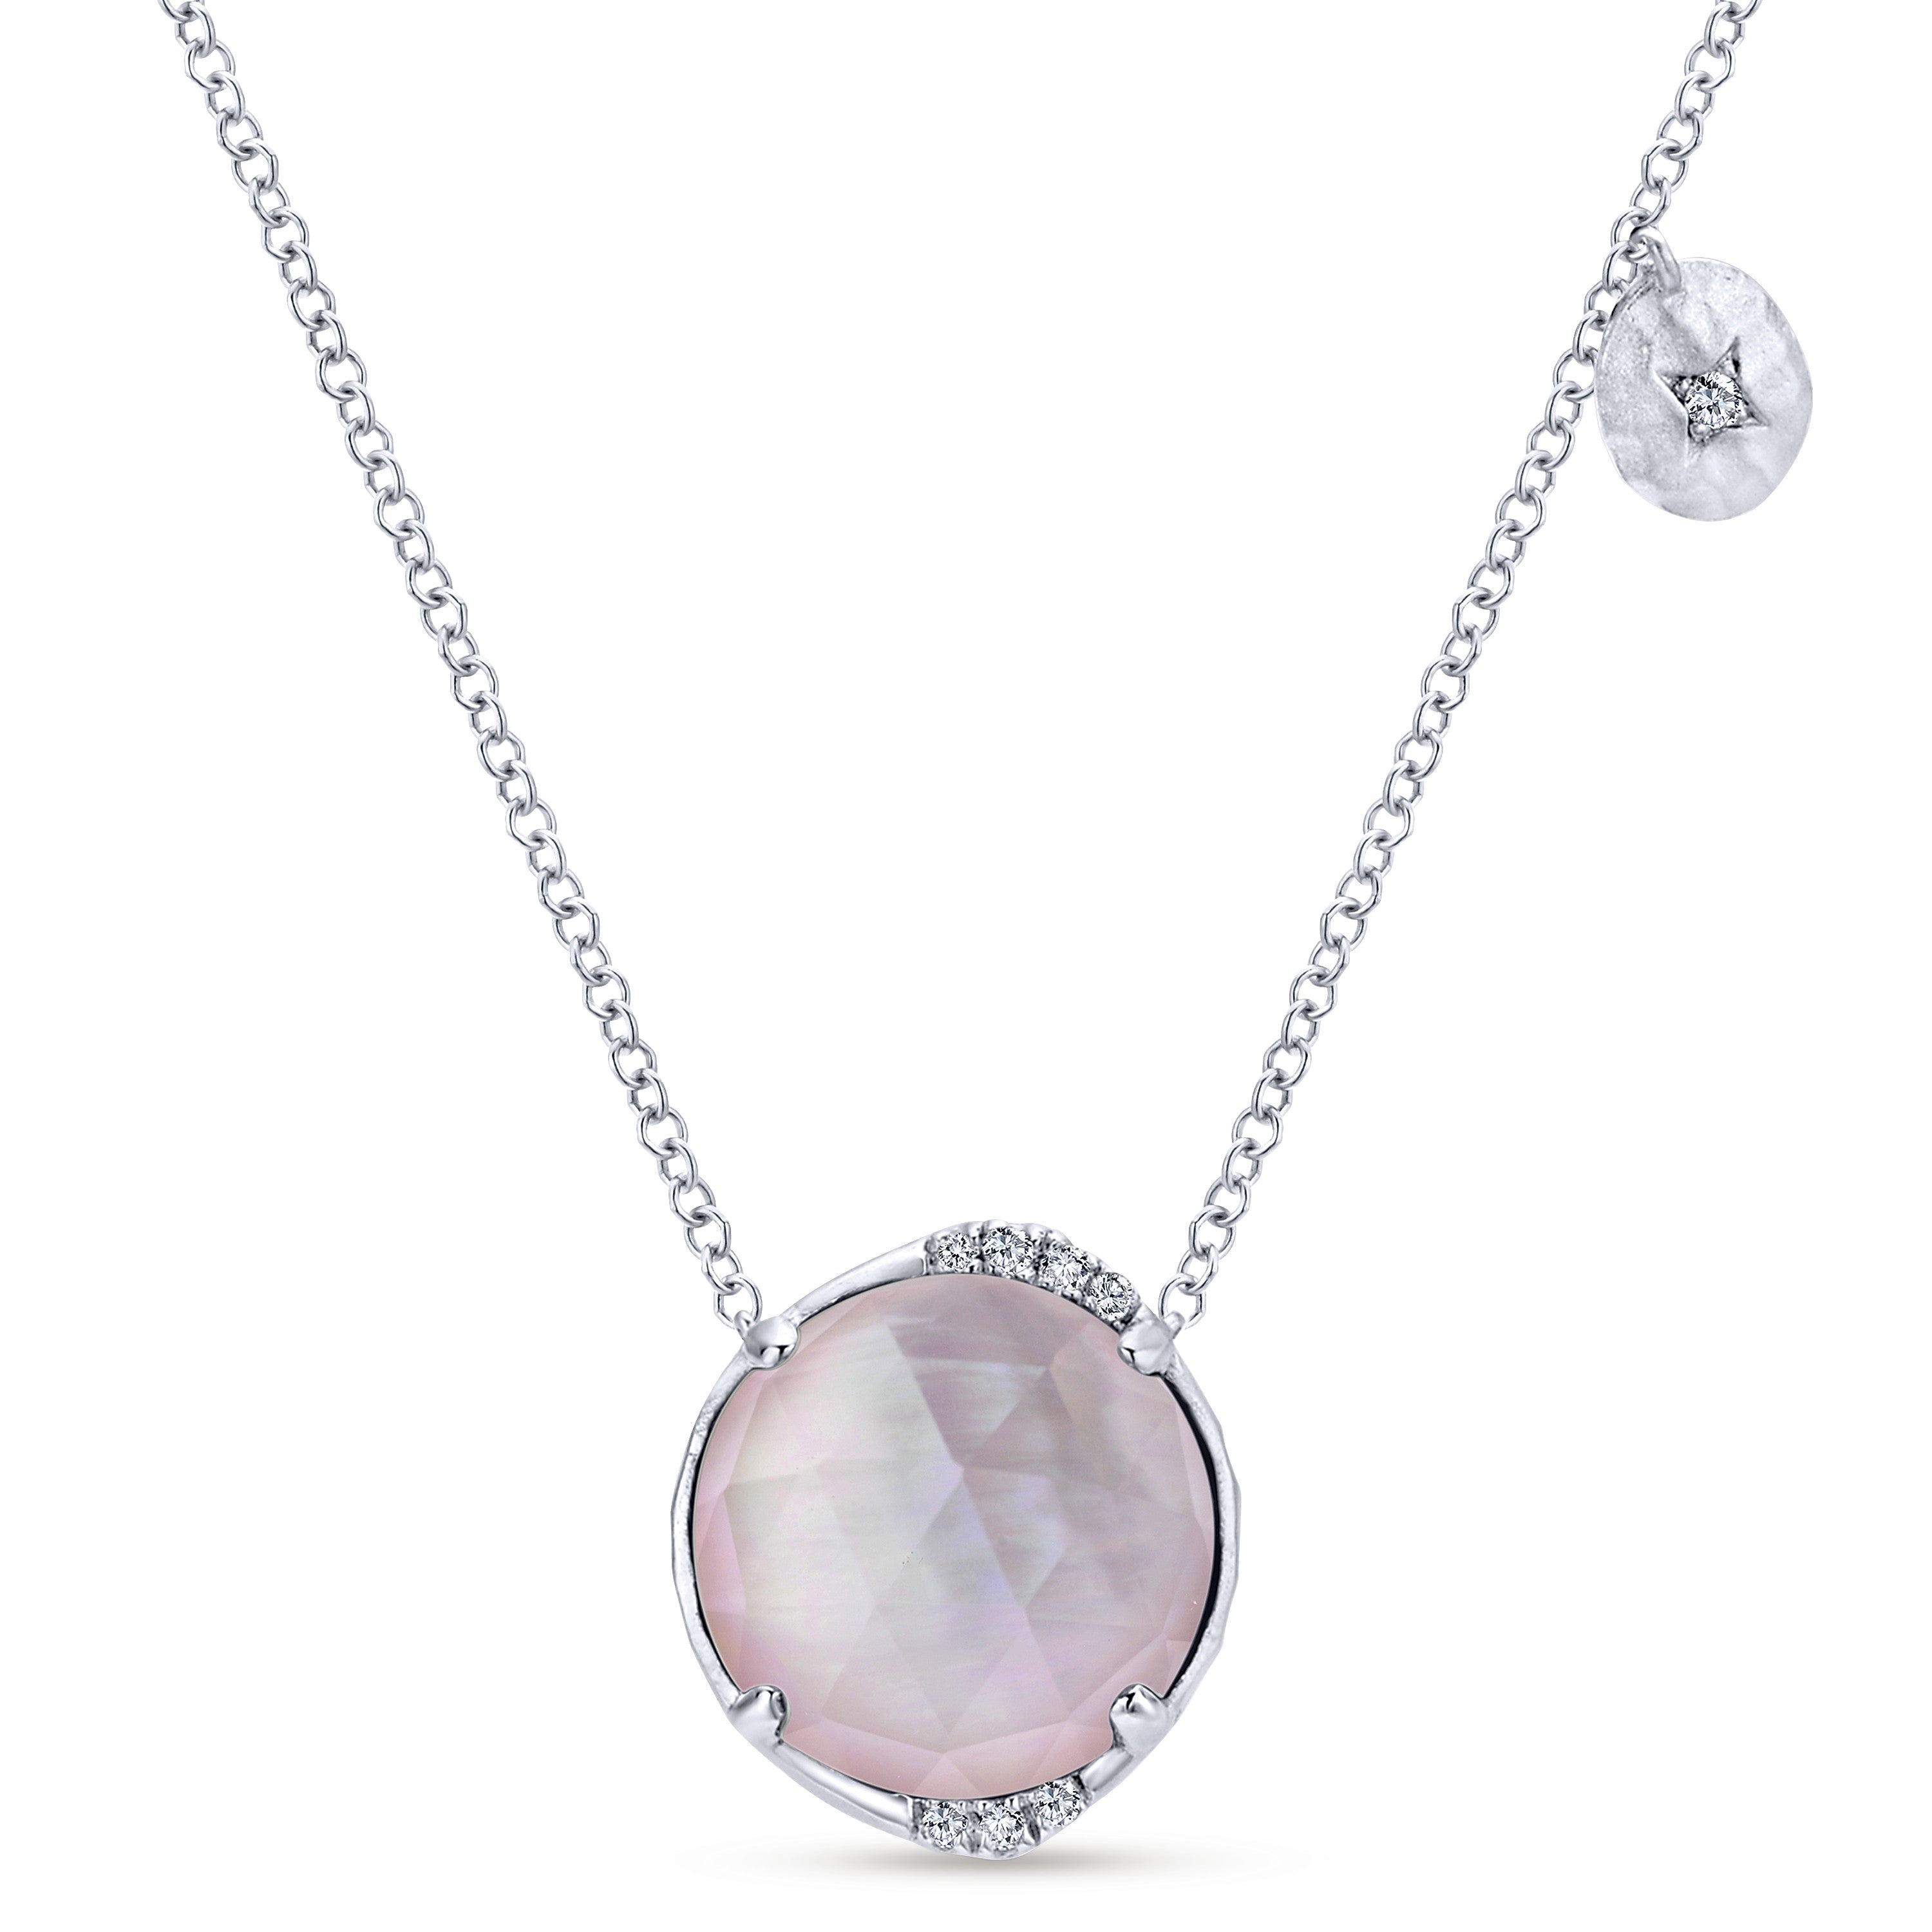 Gabriel & Co 925 Sterling Silver Rock Crystal/Pink MOP and Diamond Pendant Necklace | NK4777SV5XP